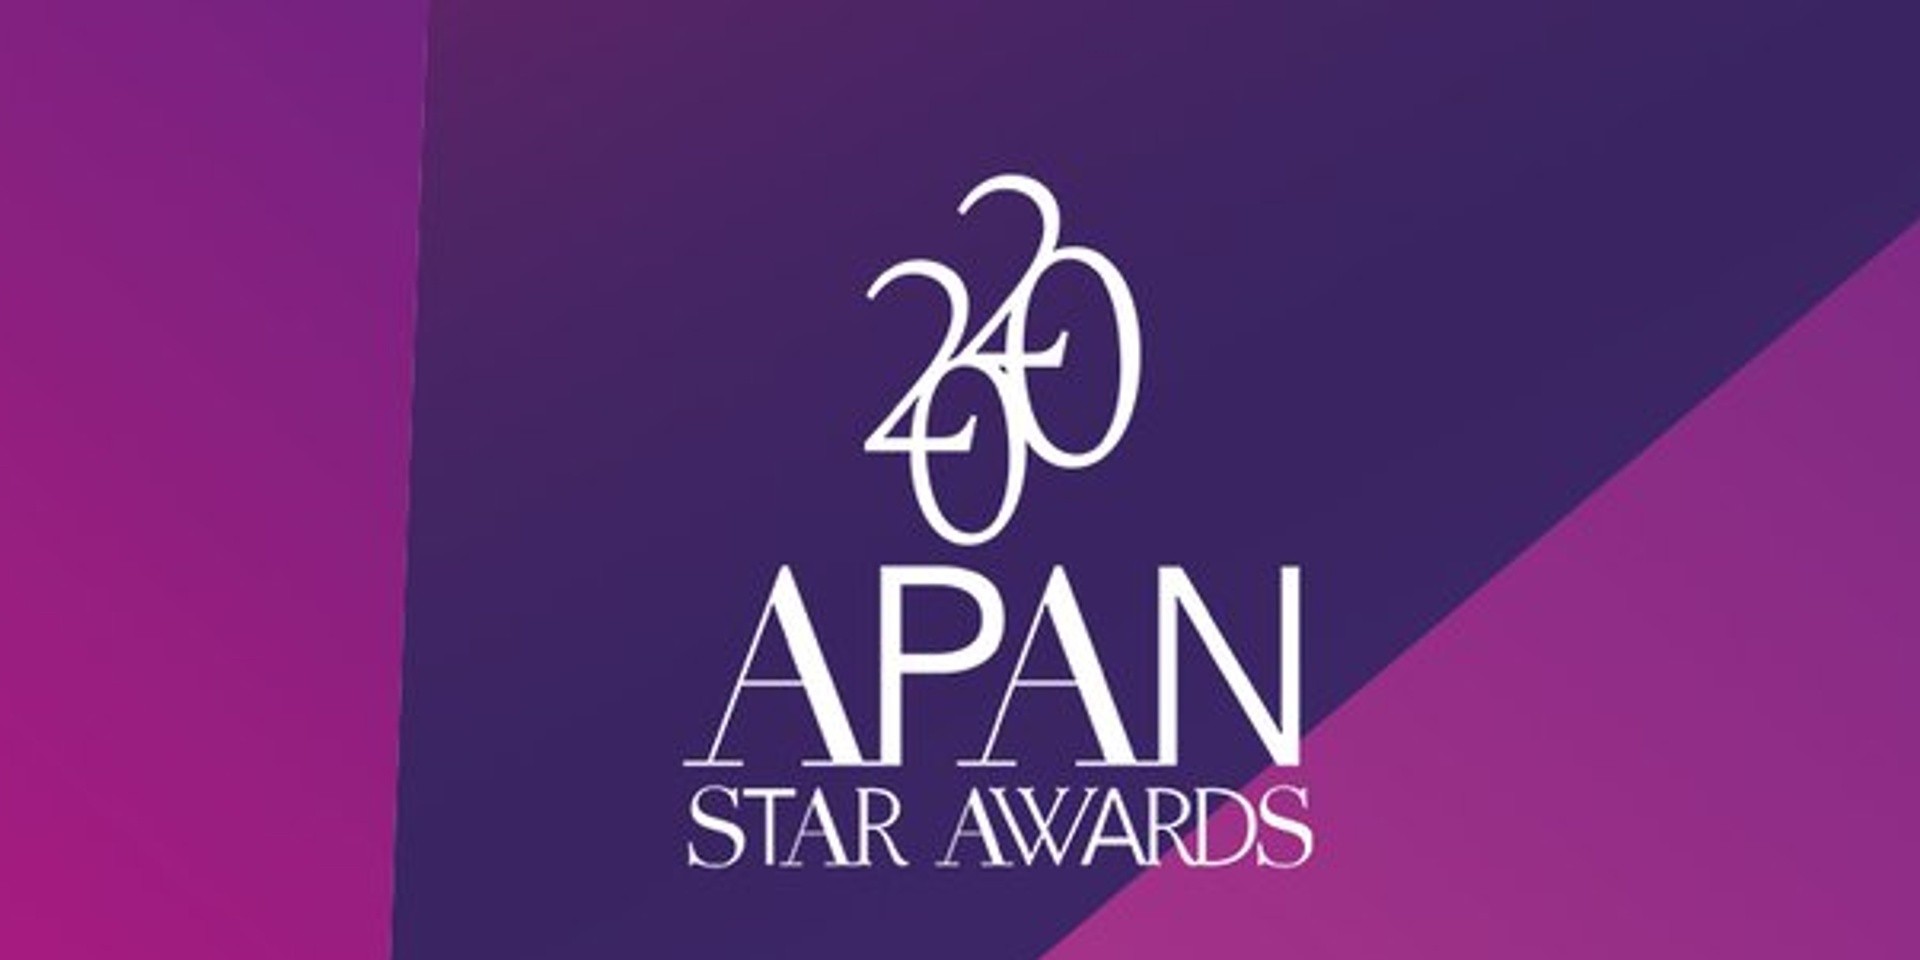 Here's how to watch the 2020 APAN Awards